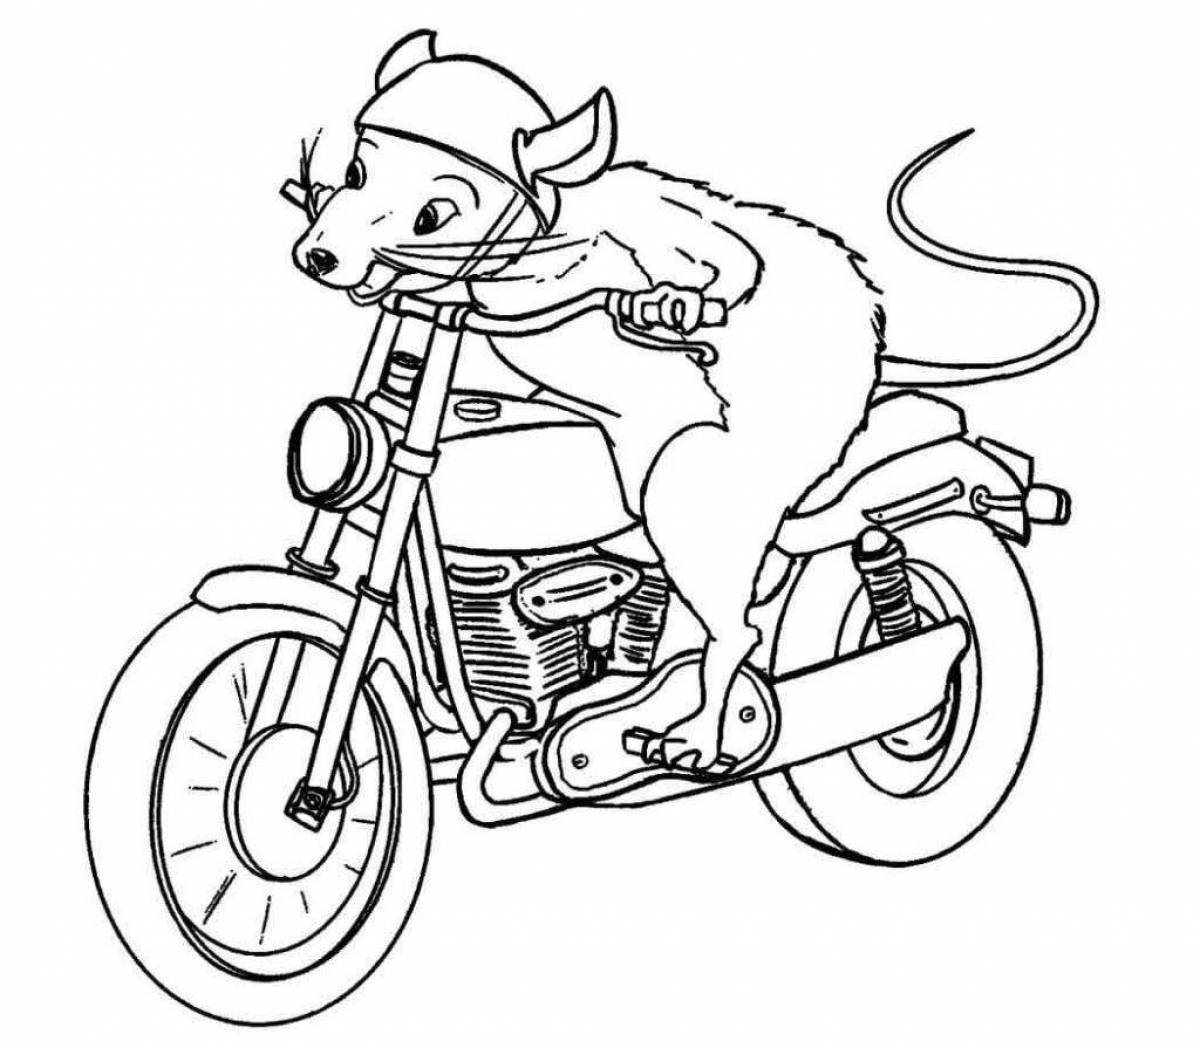 Amazing motorcycle coloring pages for 4-5 year olds